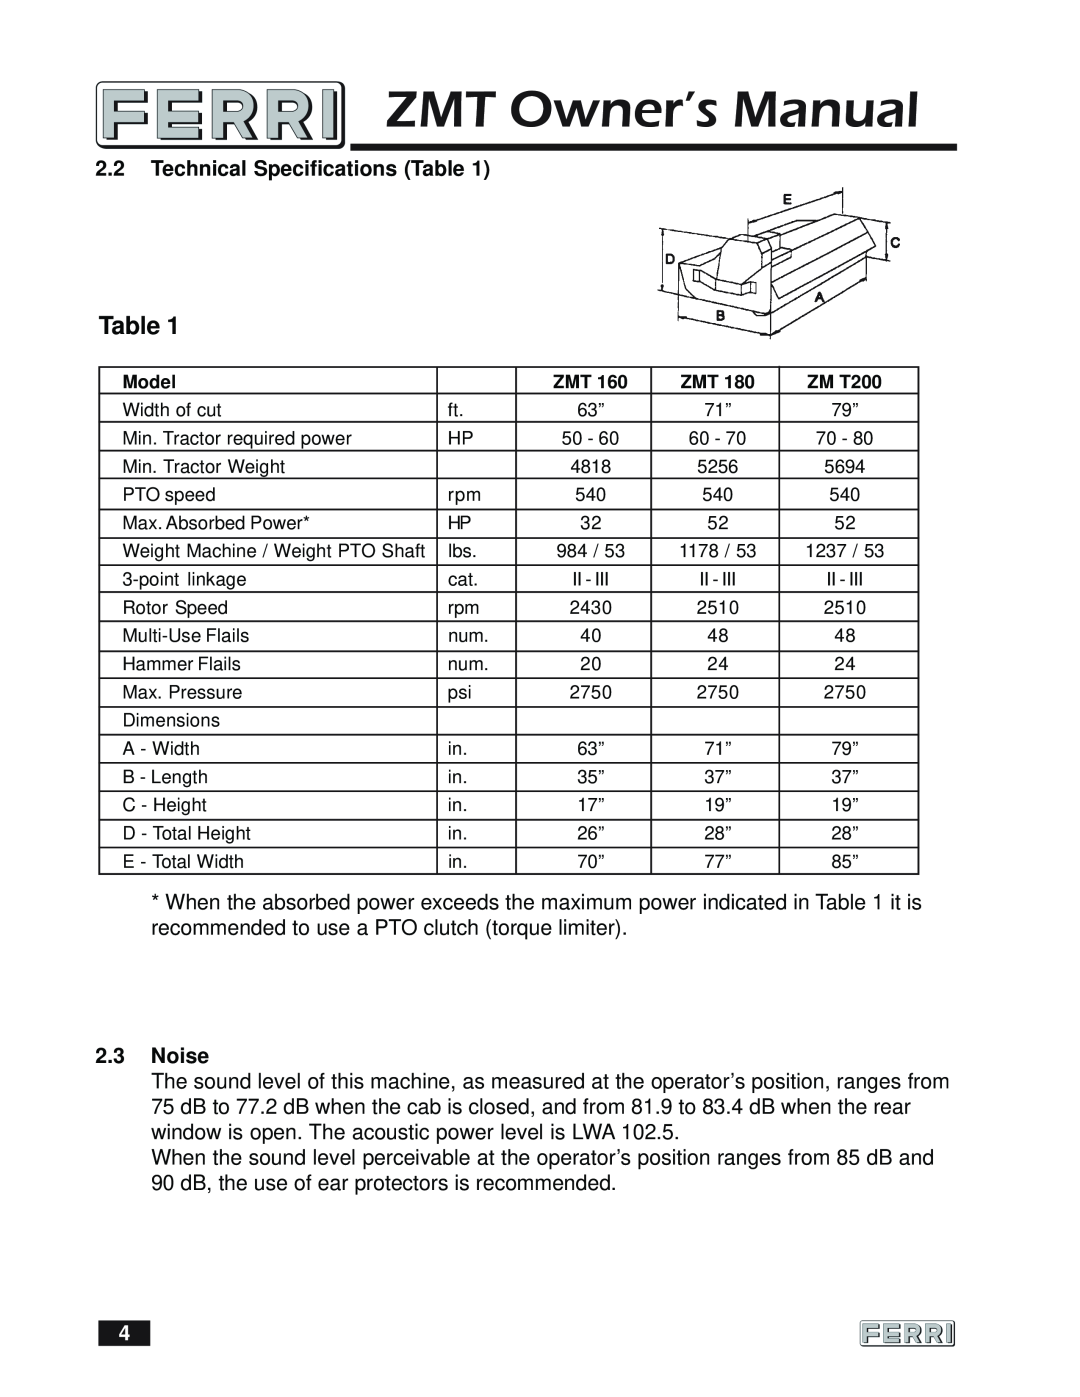 Ferris Industries 160 owner manual 2.2Technical Specifications Table, 2.3Noise 